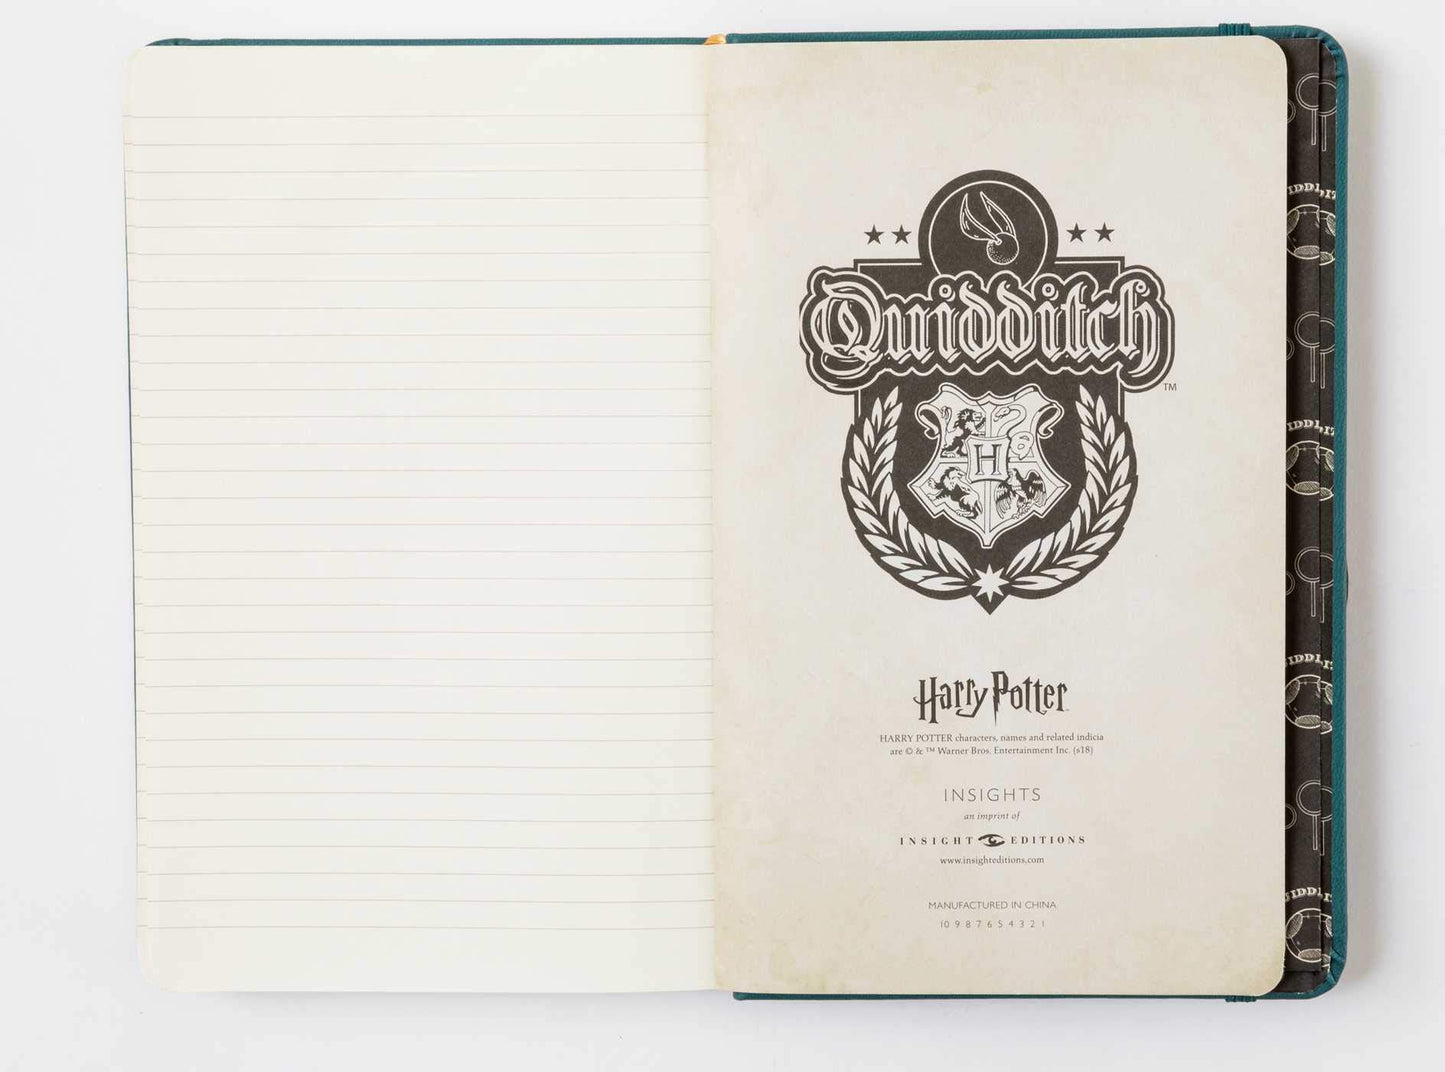 Harry Potter: Quidditch Hardcover Ruled Journal, pre venta